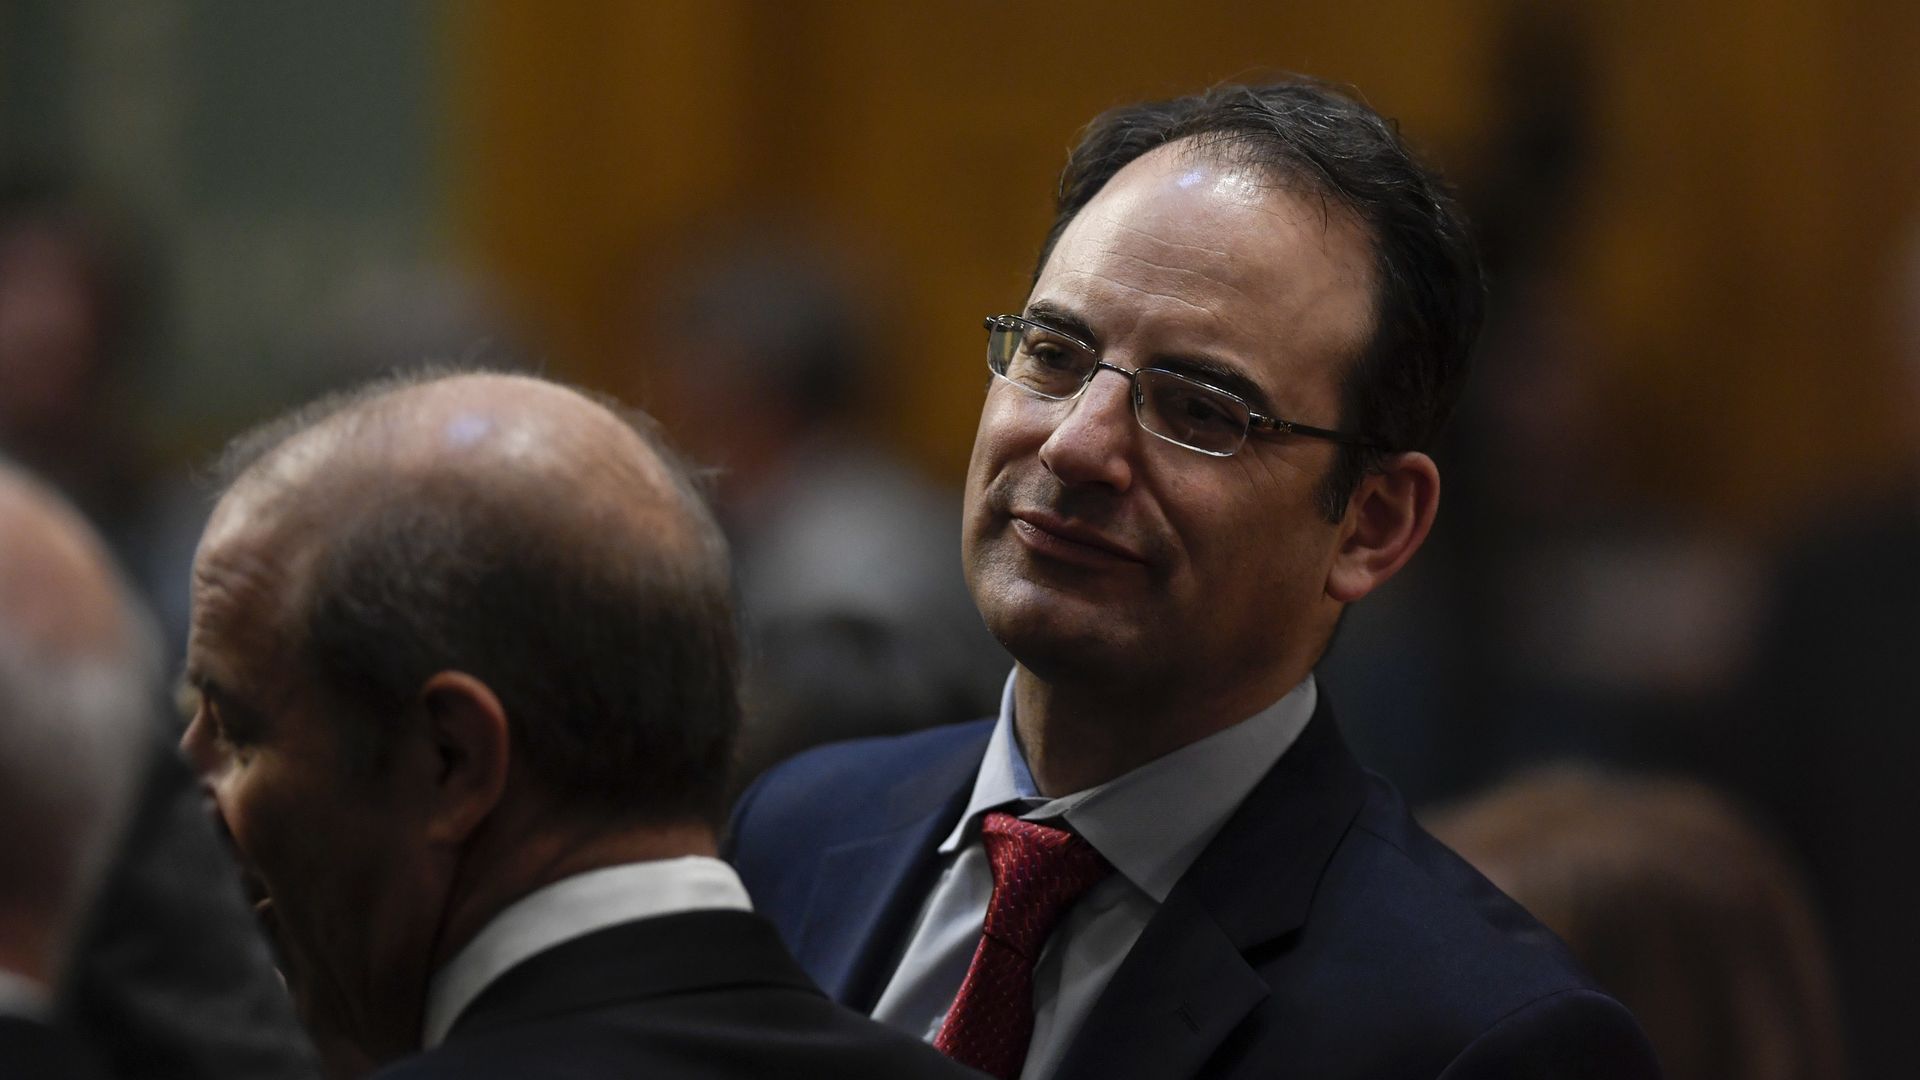 Colorado Attorney General Phil Weiser at the state Capitol in January 2020. Photo: AAron Ontiveroz/Denver Post via Getty Images